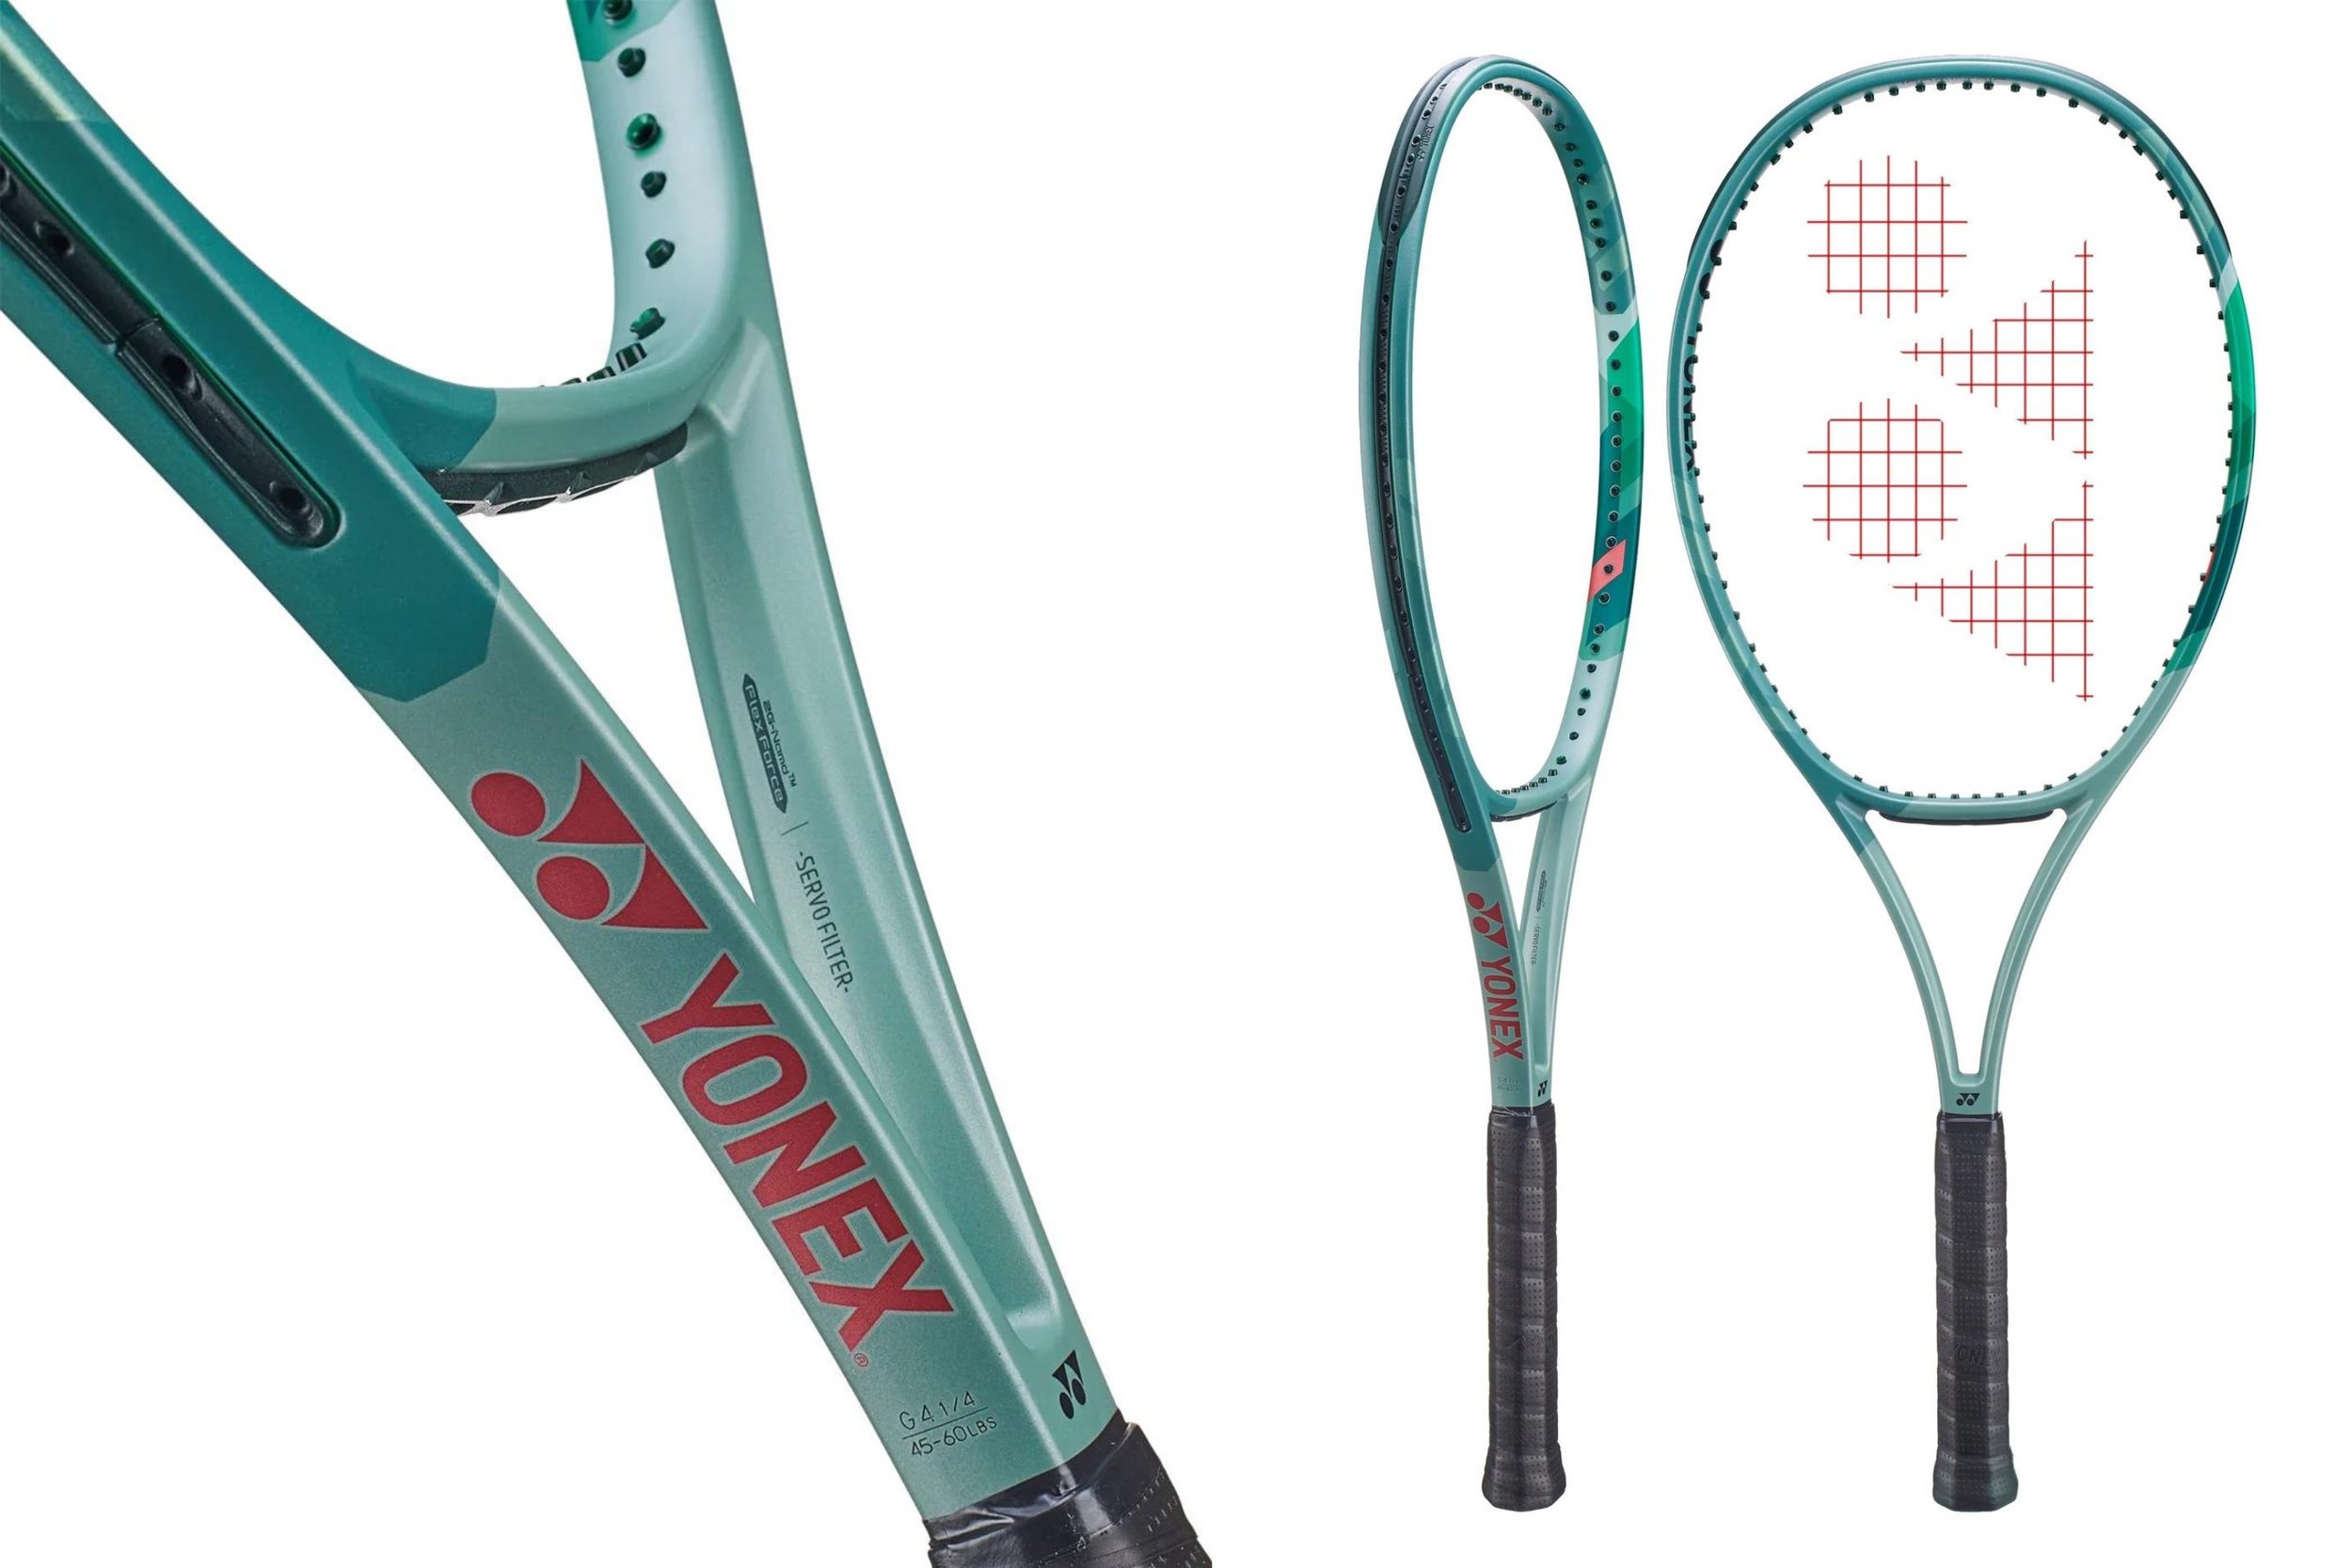 Yonex Percept 100 Tennis Racket Review: The Best I Have Played With ...